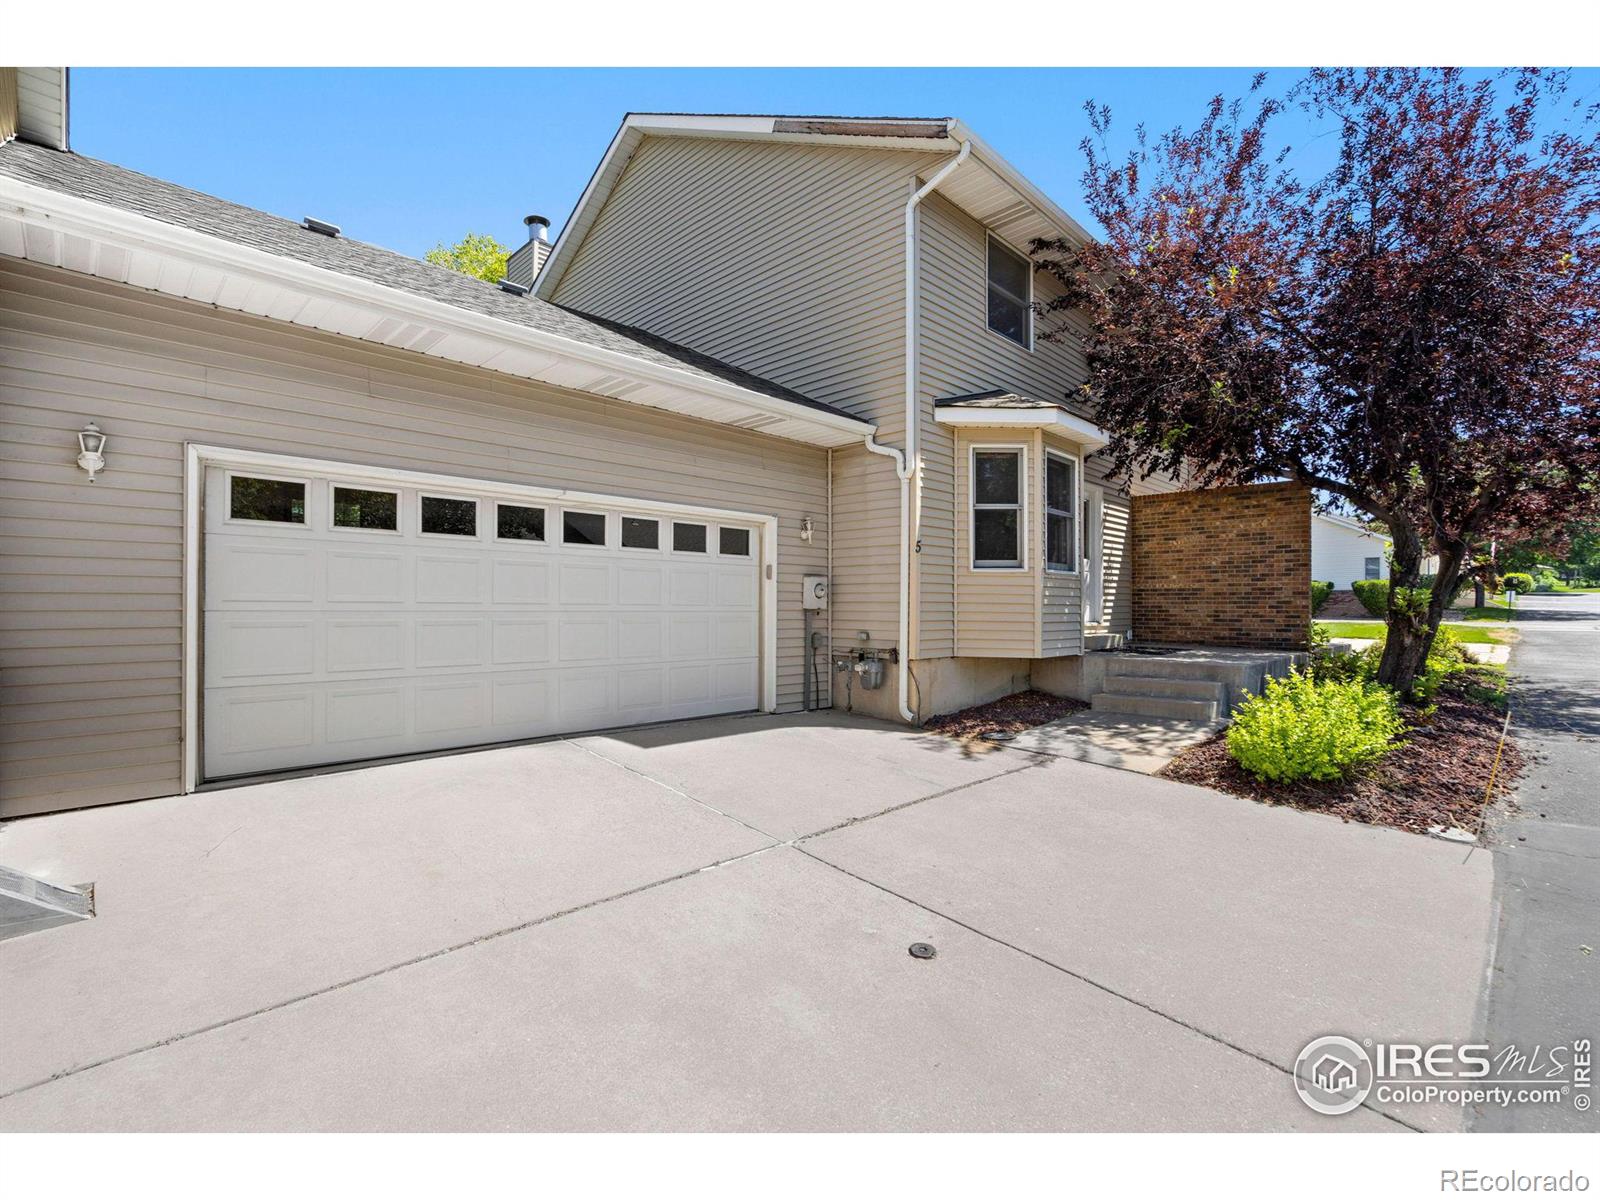 Report Image for 5601  18th Street,Greeley, Colorado